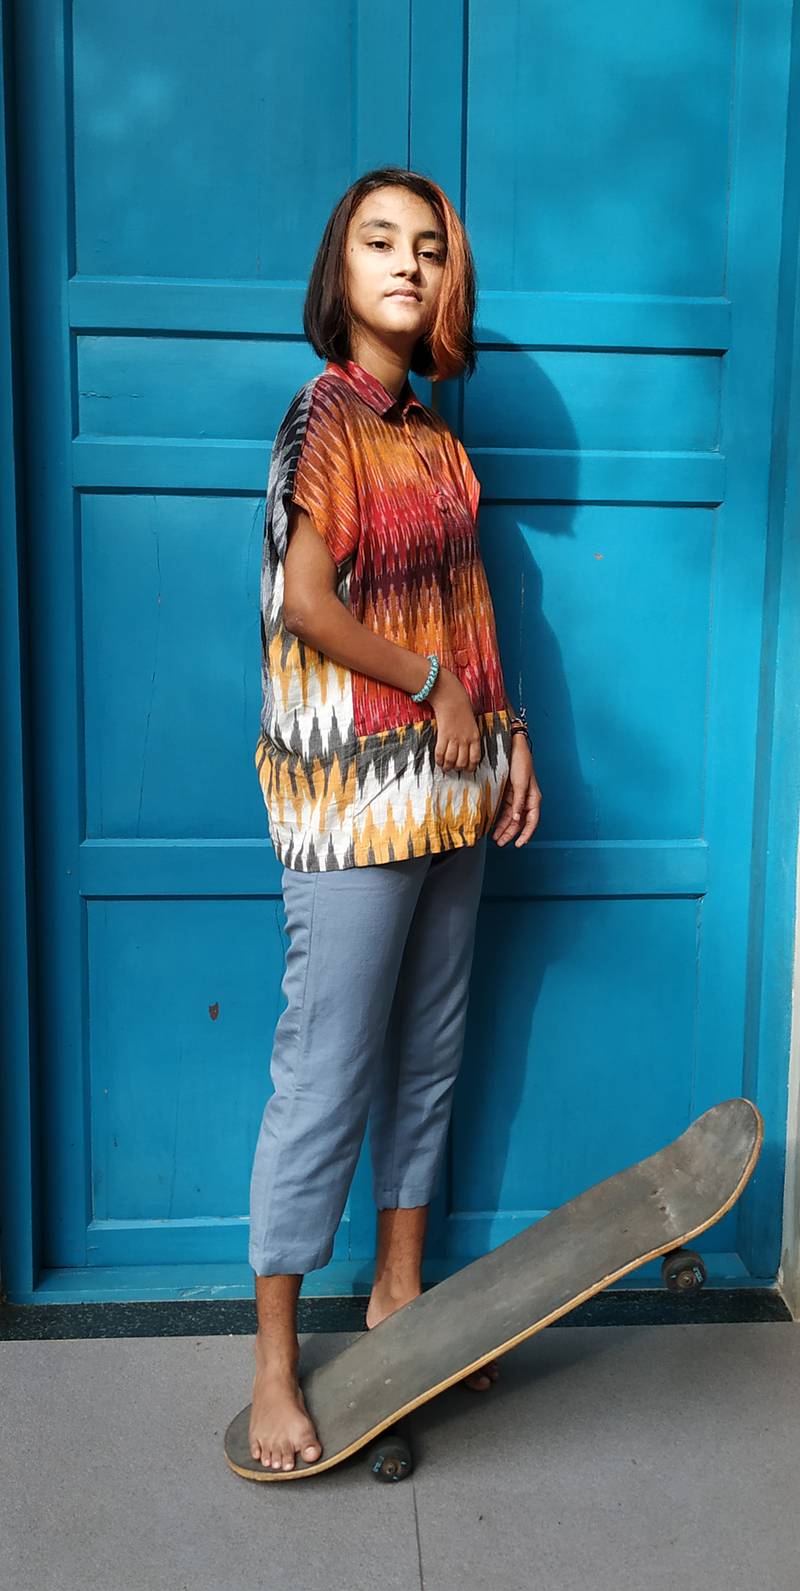 Tilotama, who has restricted movement in her arms, wears a cotton ikat magnetic shirt that allows her the autonomy to put on her own clothes. Photo: Move Ability